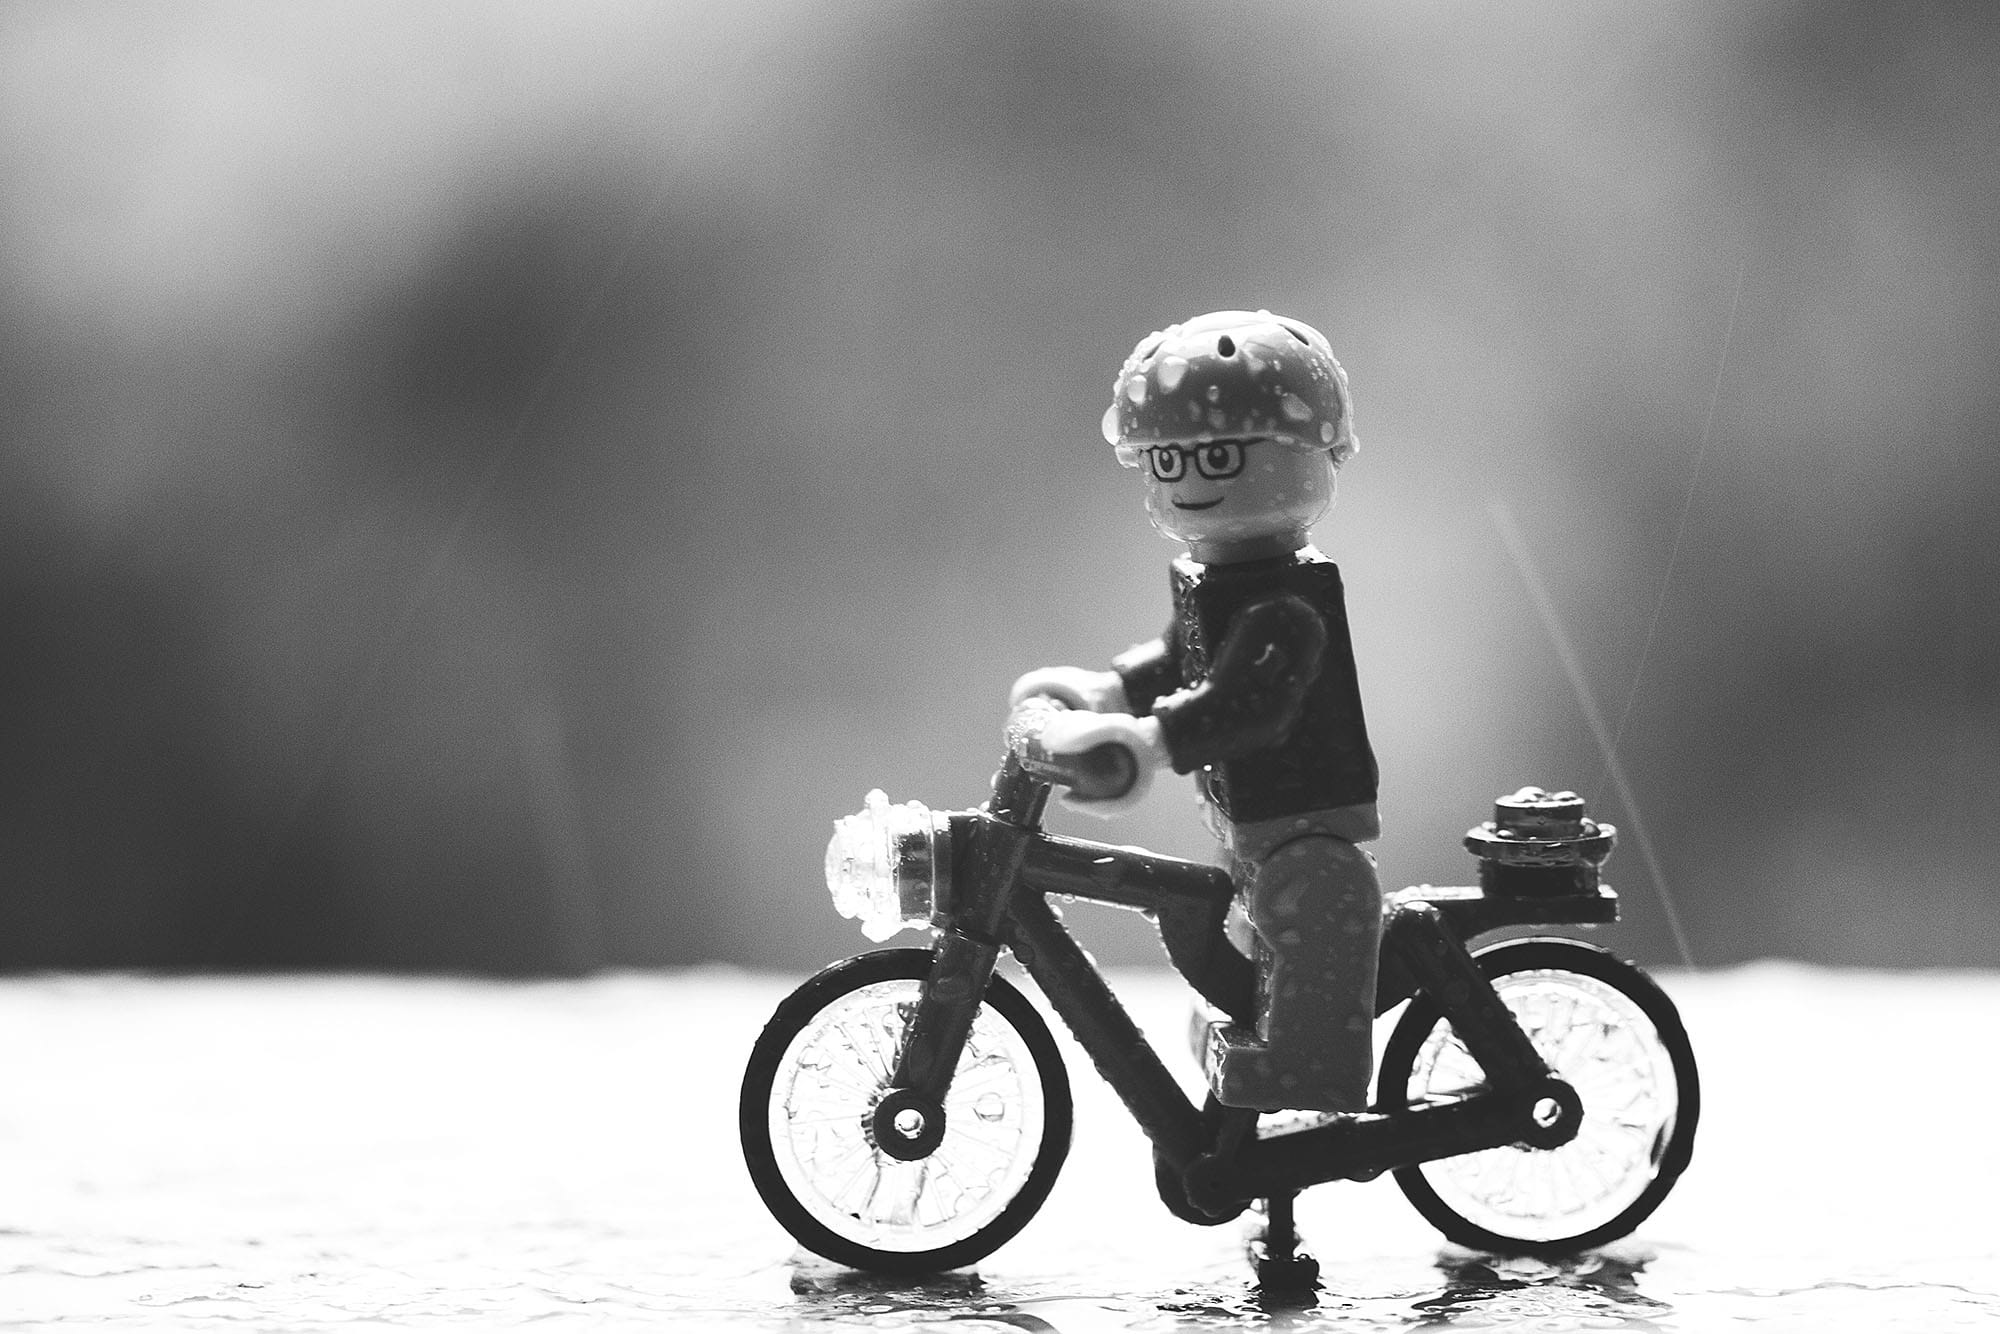 A lego figurine on a bicycle